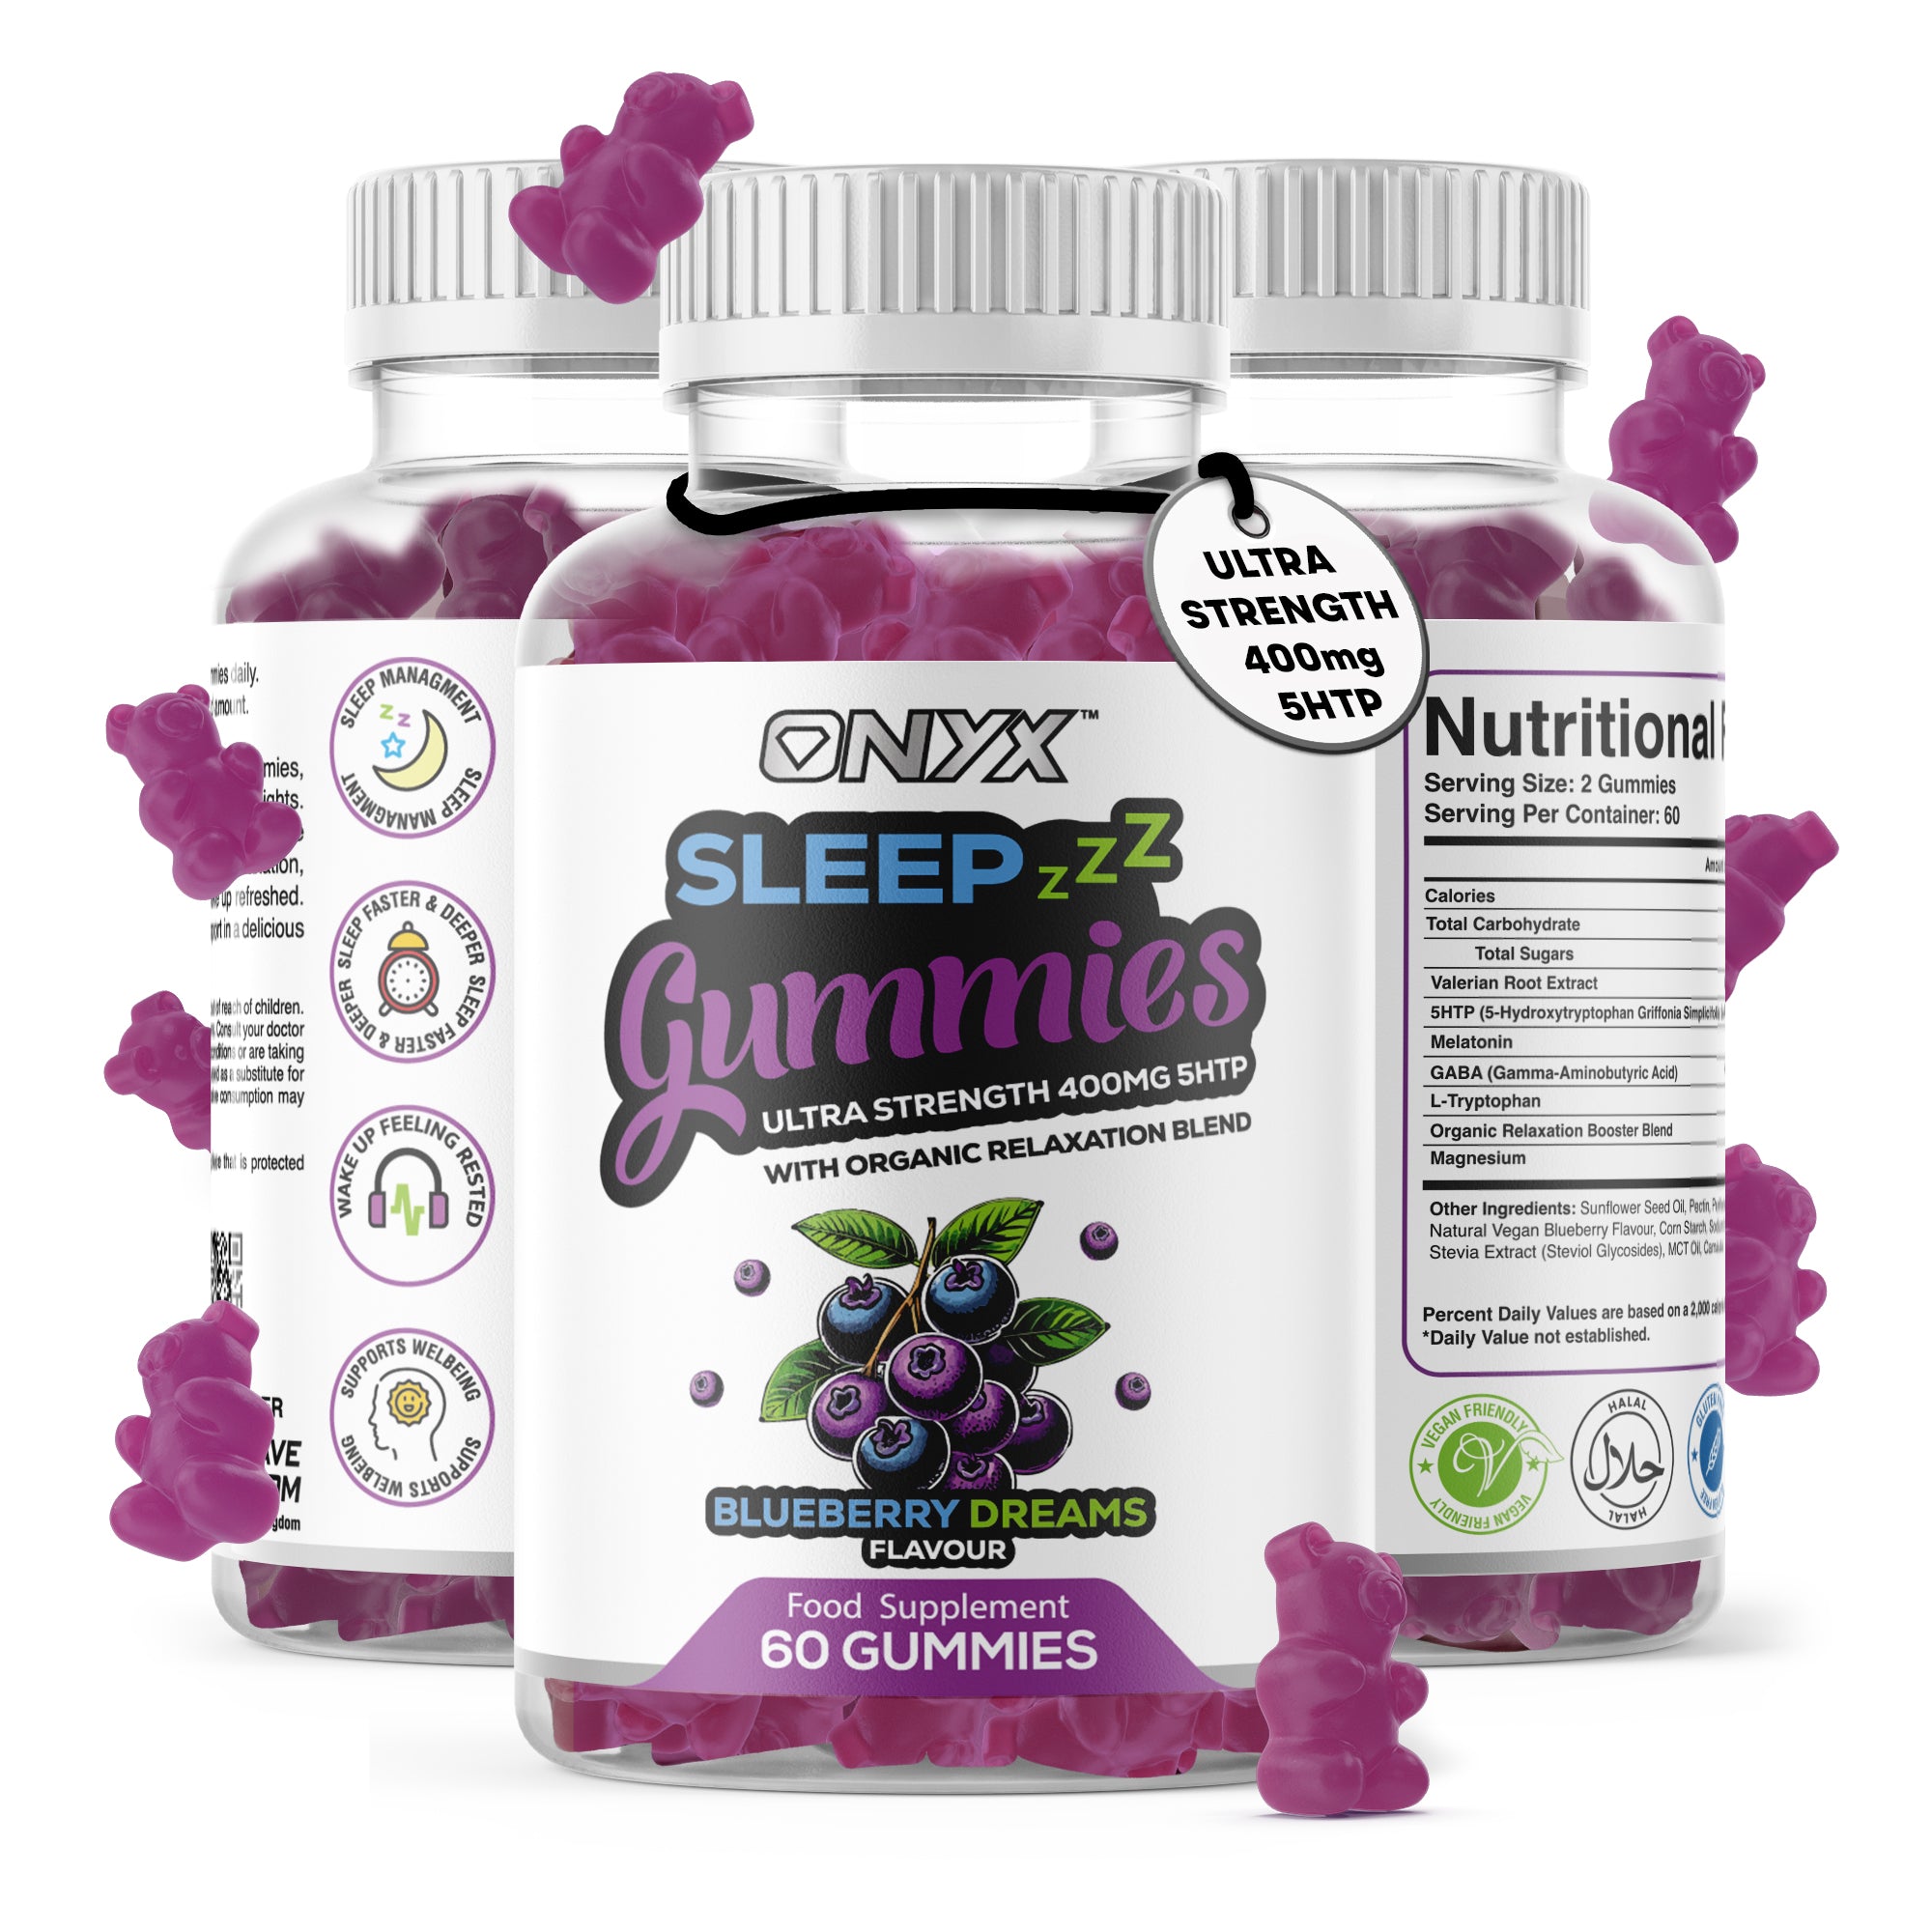 Night-Time Gummies with Organic Relaxation Blend for Sleep Support - Blueberry Dreams Flavor - 60 Gummies by ONYX